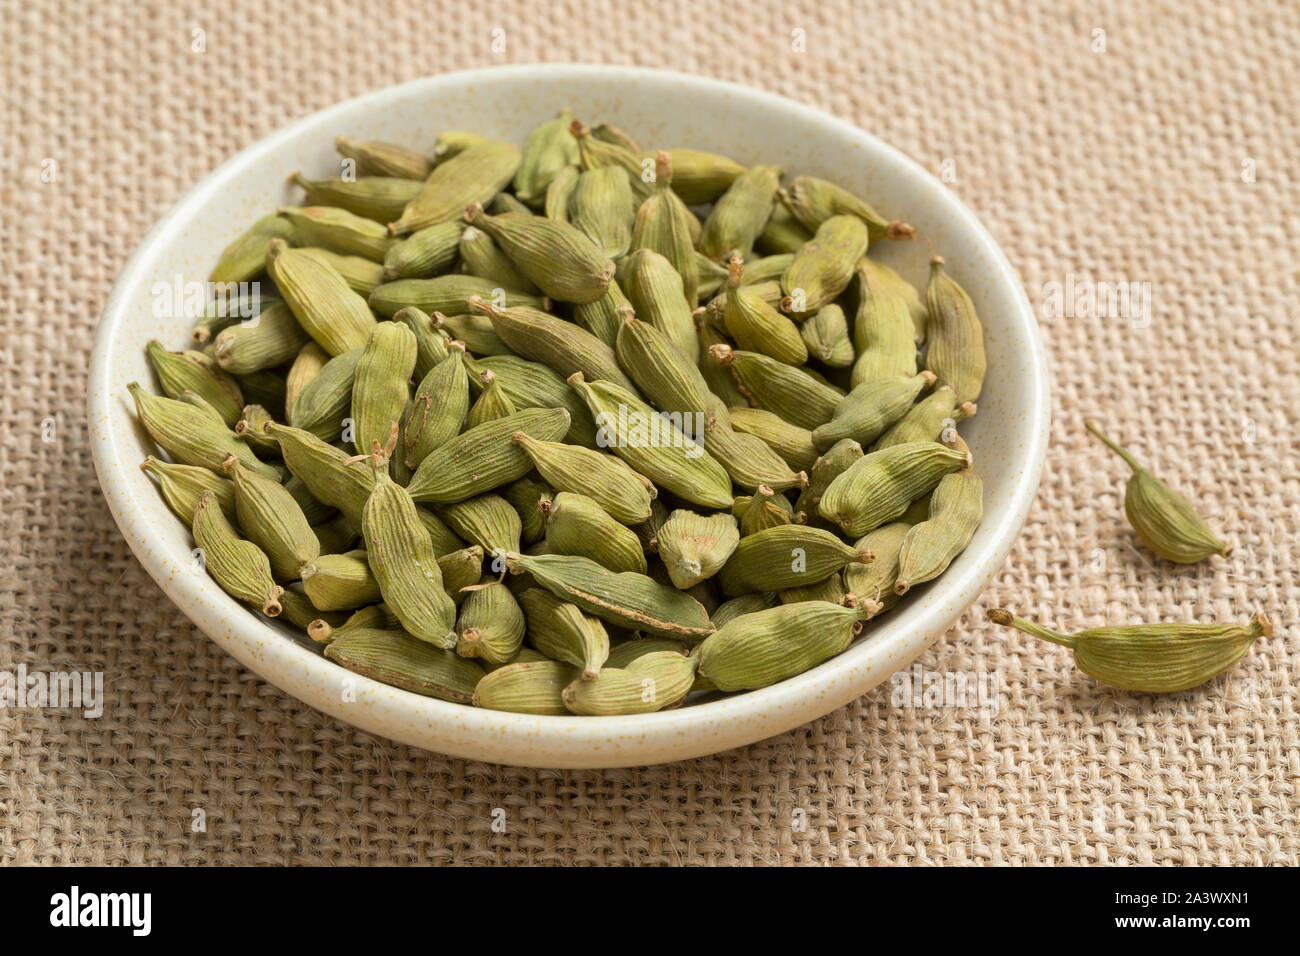 Bowl with green whole cardamom seed pods close up Stock Photo